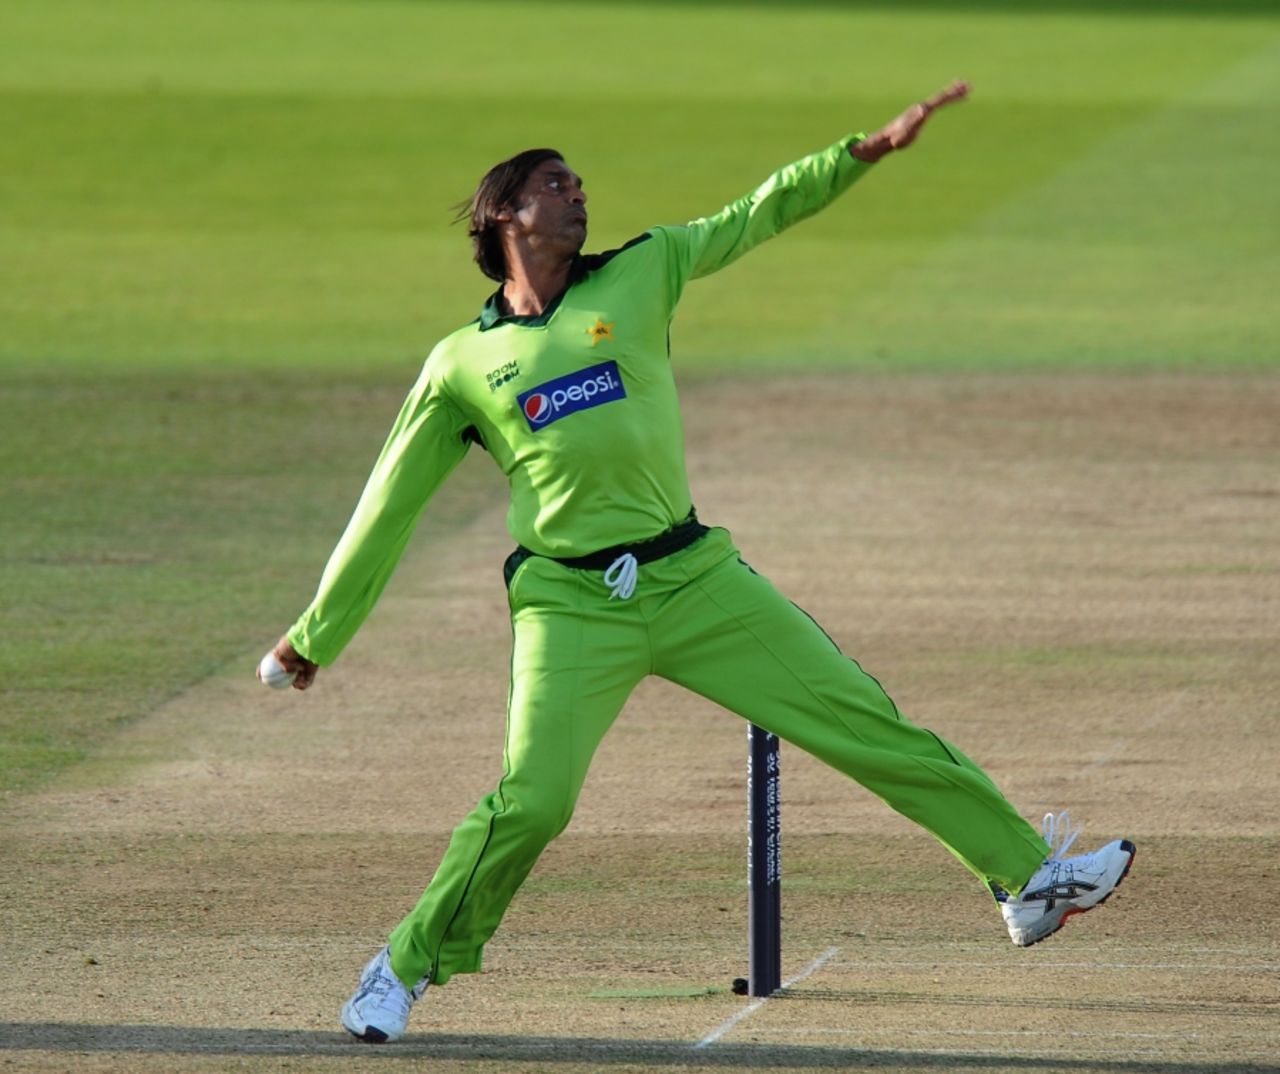 Shoaib Akhtar was pacy but erratic in his opening spell, England v Pakistan, 4th ODI, Lord's, September 20, 2010